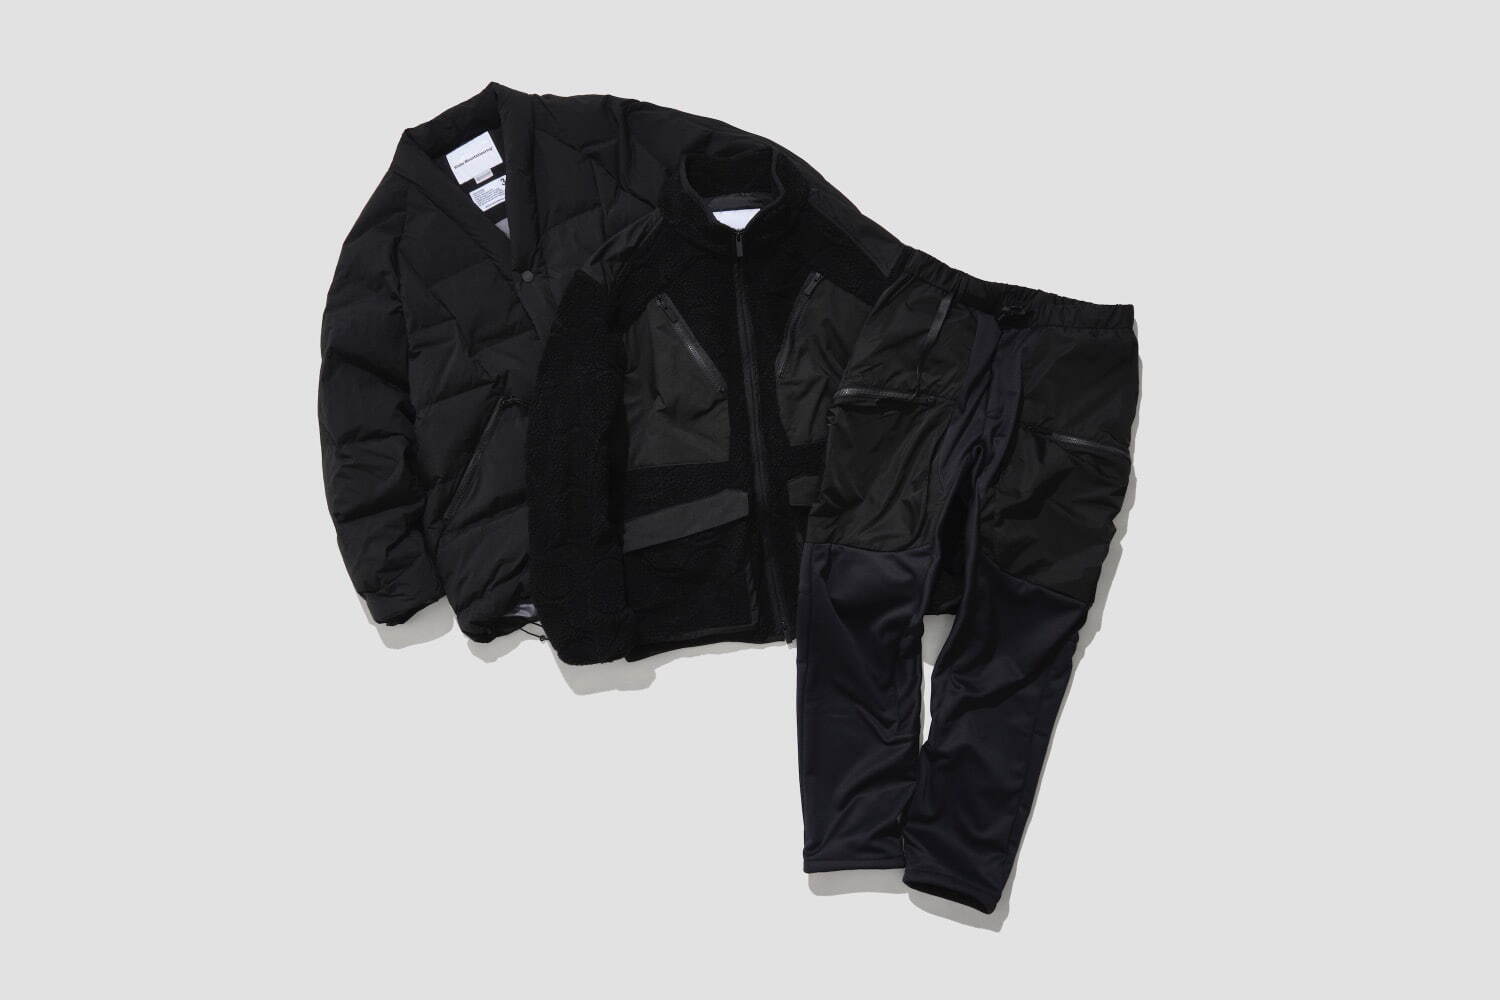 White Mountaineering WINDSTOPPER×TAION GORE-TEX WINDSTOPPERHANTEN DOWN JACKET 71,500円、
White Mountaineering WINDSTOPPER×GORE-TEX WINDSTOPPER BOA FLEECE JACKET 64,900円、
White Mountaineering WINDSTOPPER×EX. GORE-TEX WINDSTOPPER JERSEY HYBRID PANTS 61,600円